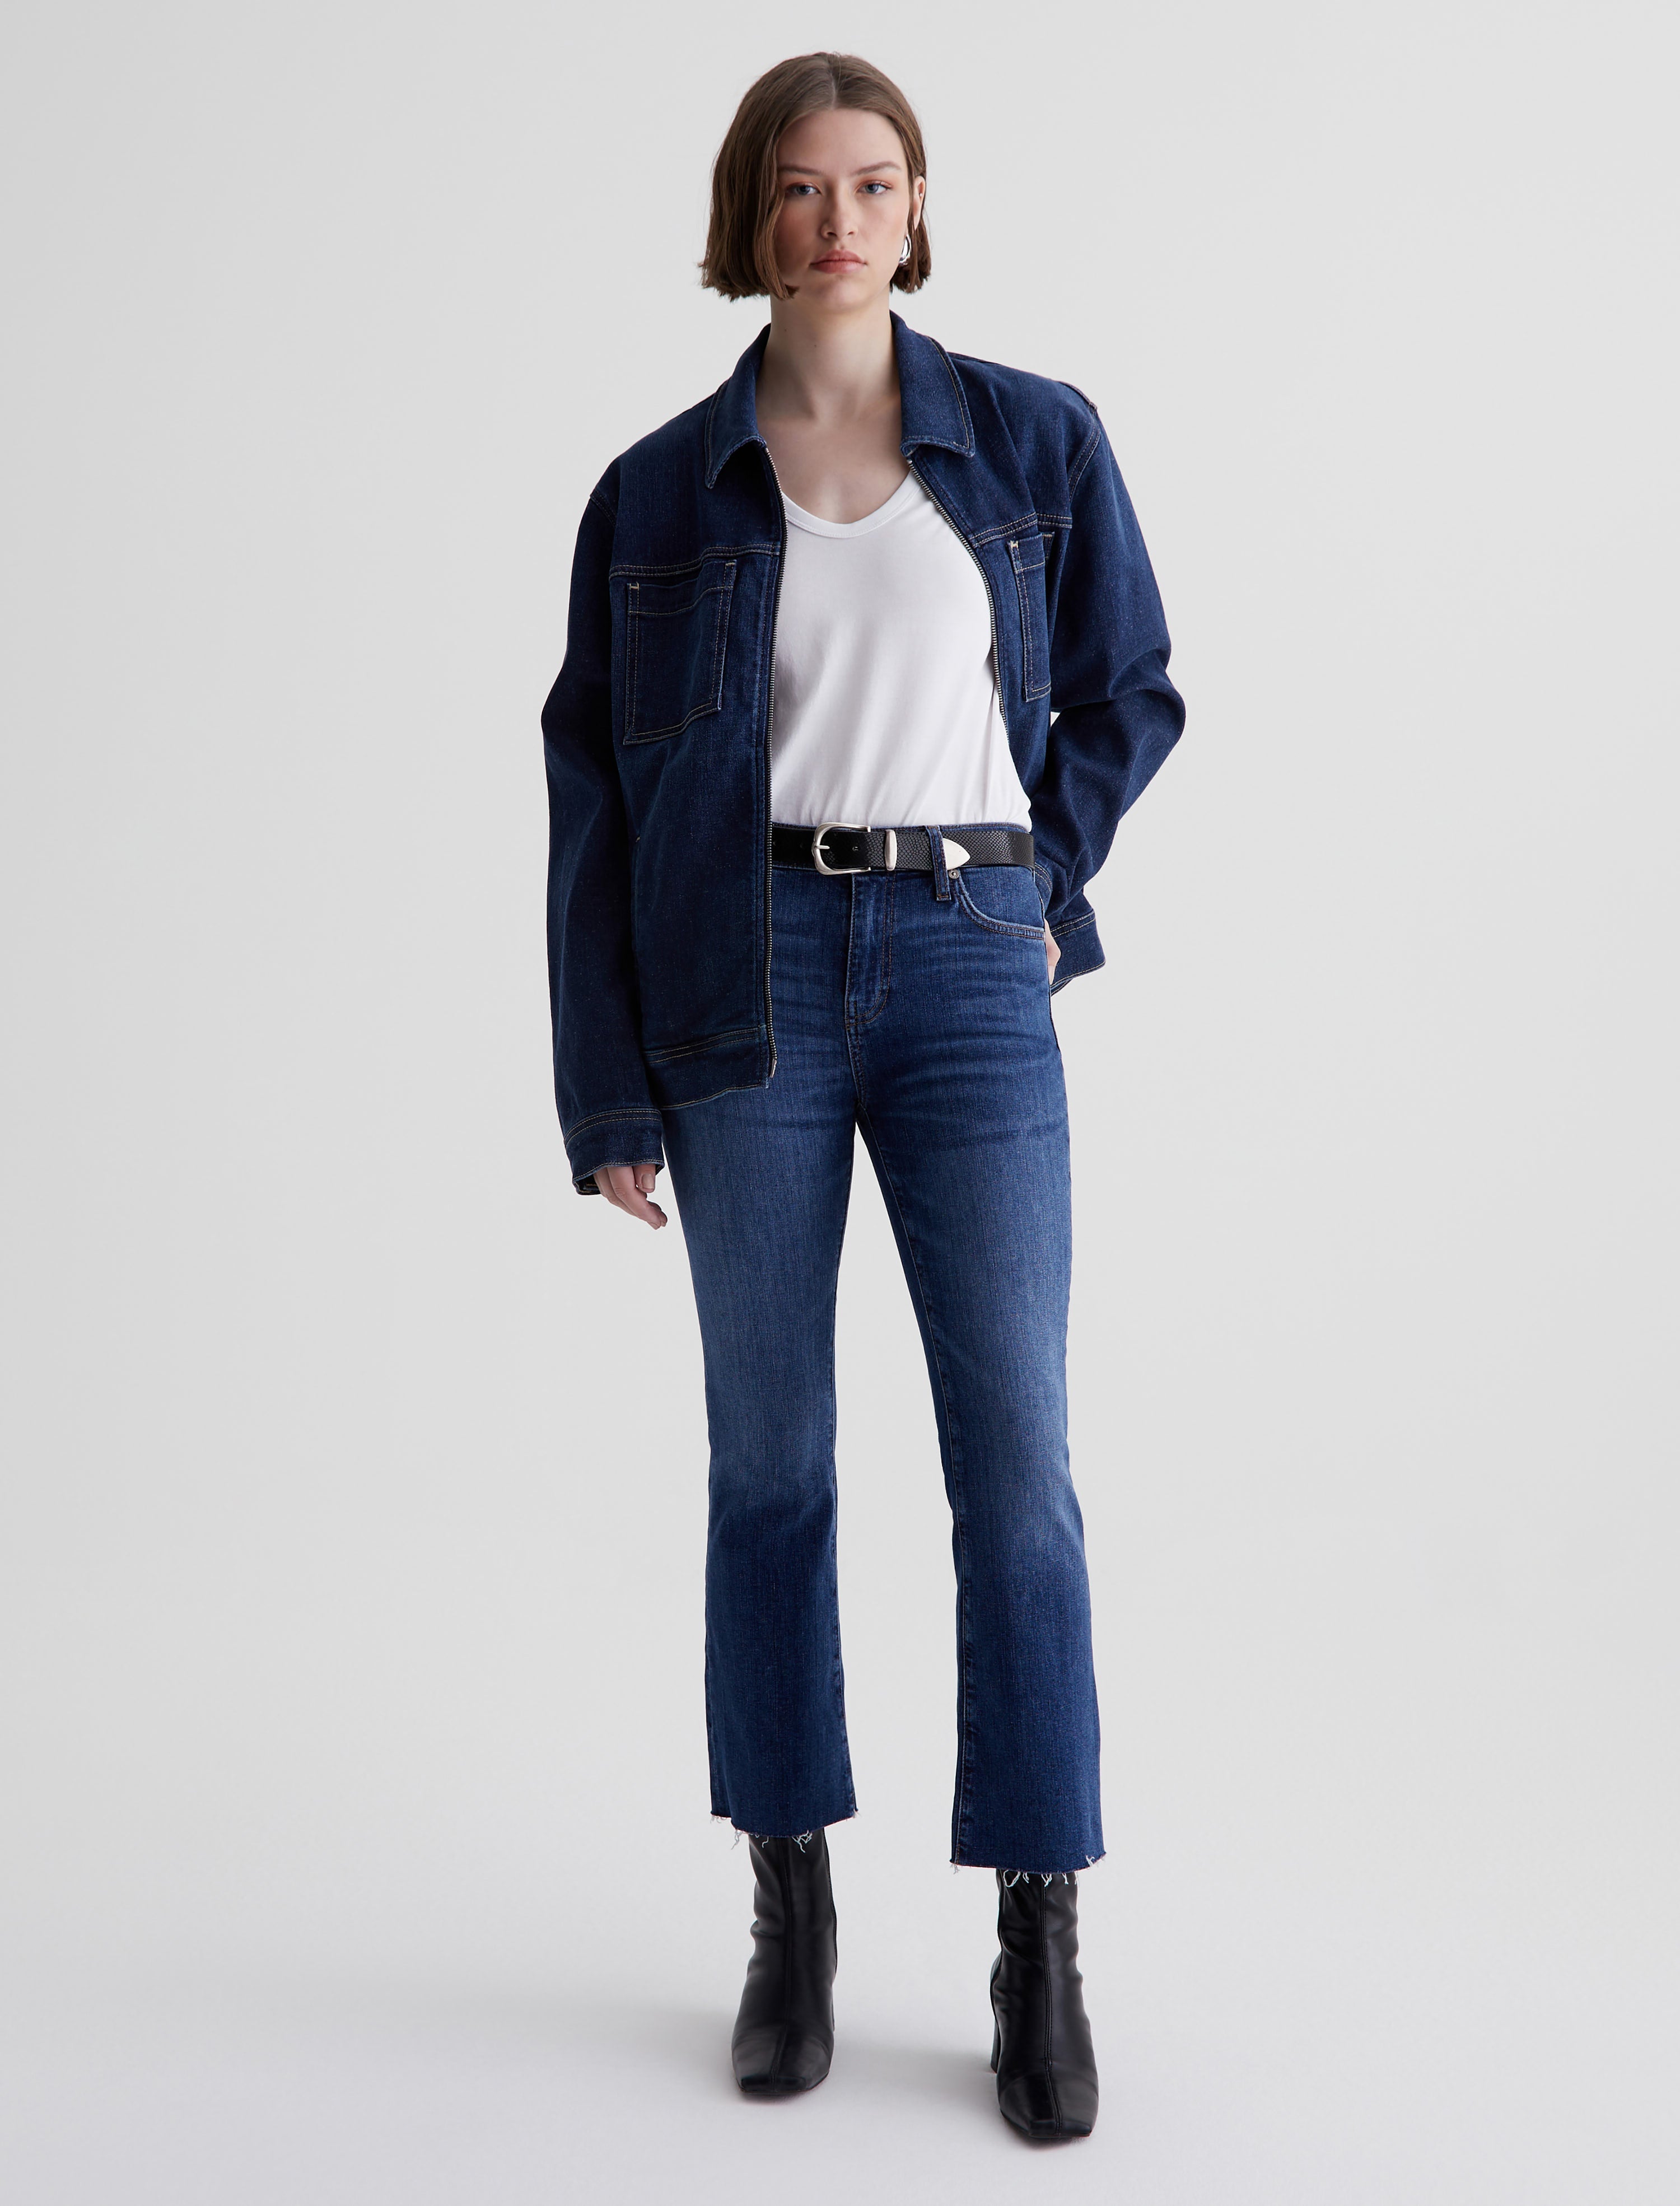 Jeans at Injeanius | Designer Brands to Elevate Your Every Day 